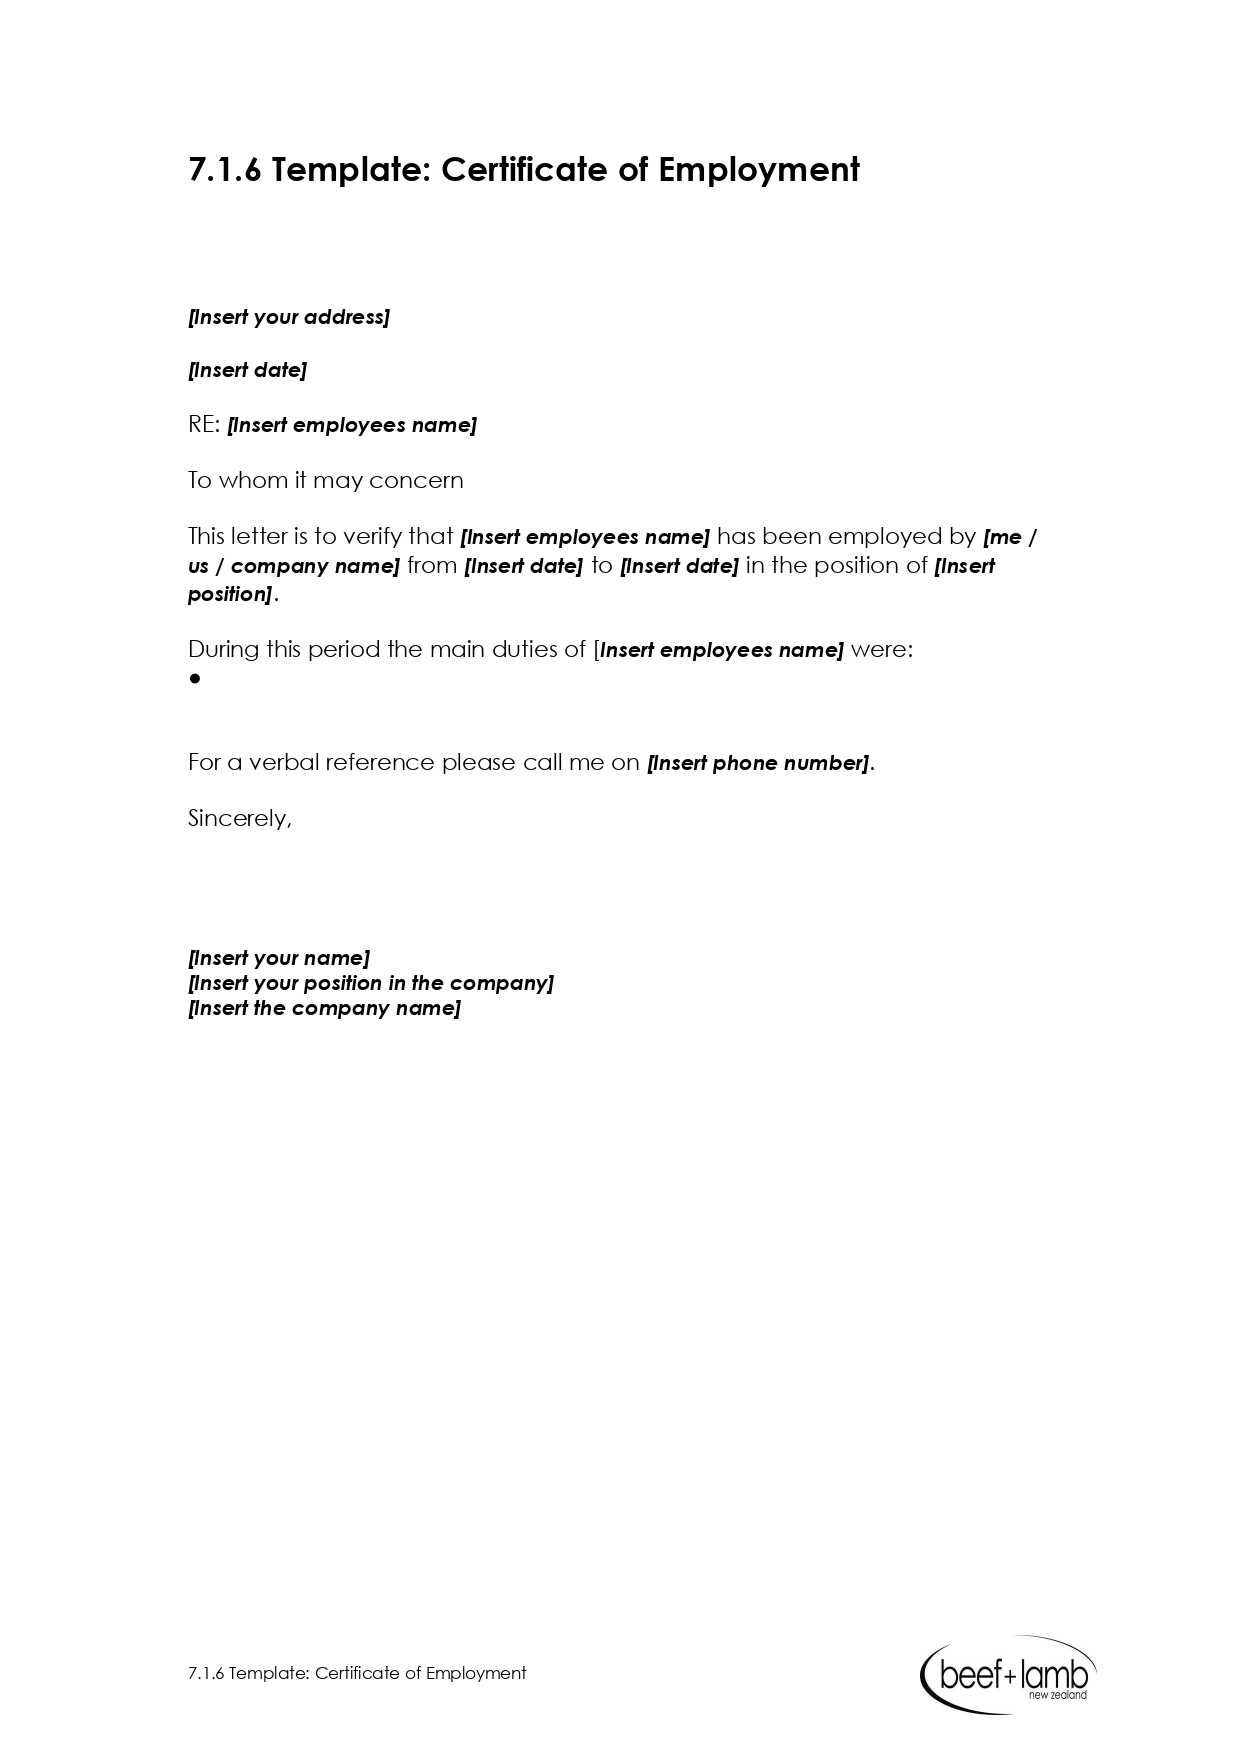 Editable Certificate Of Employment Template – Google Docs For Certificate Of Employment Template